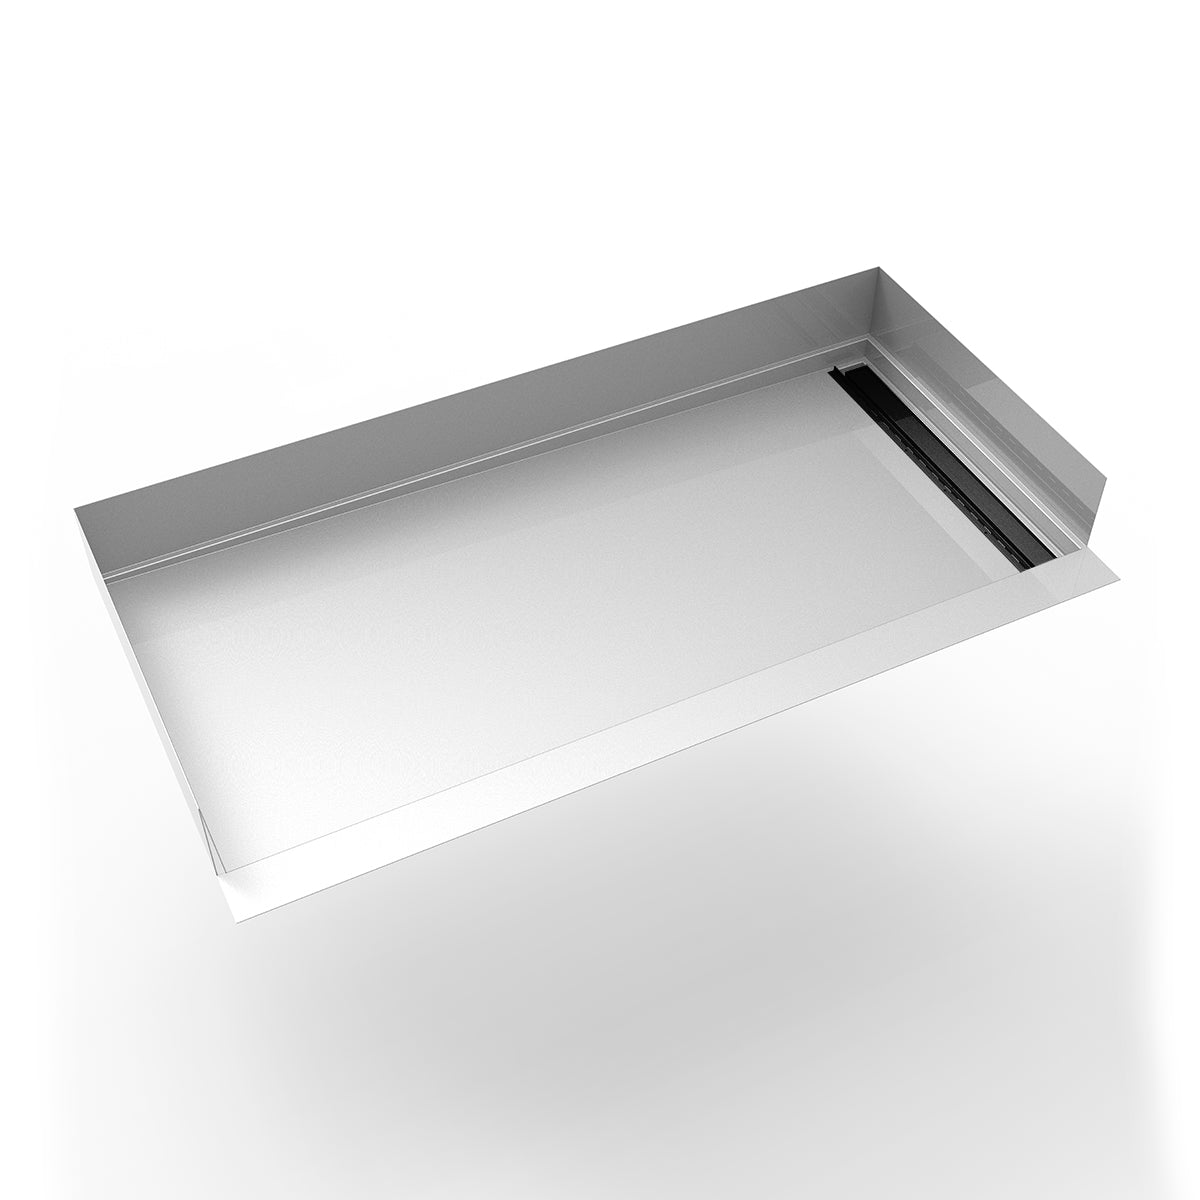 Infinity Drain 30"x 60" Curbless Stainless Steel Shower Base with Right Wall Tile Insert Linear Drain location